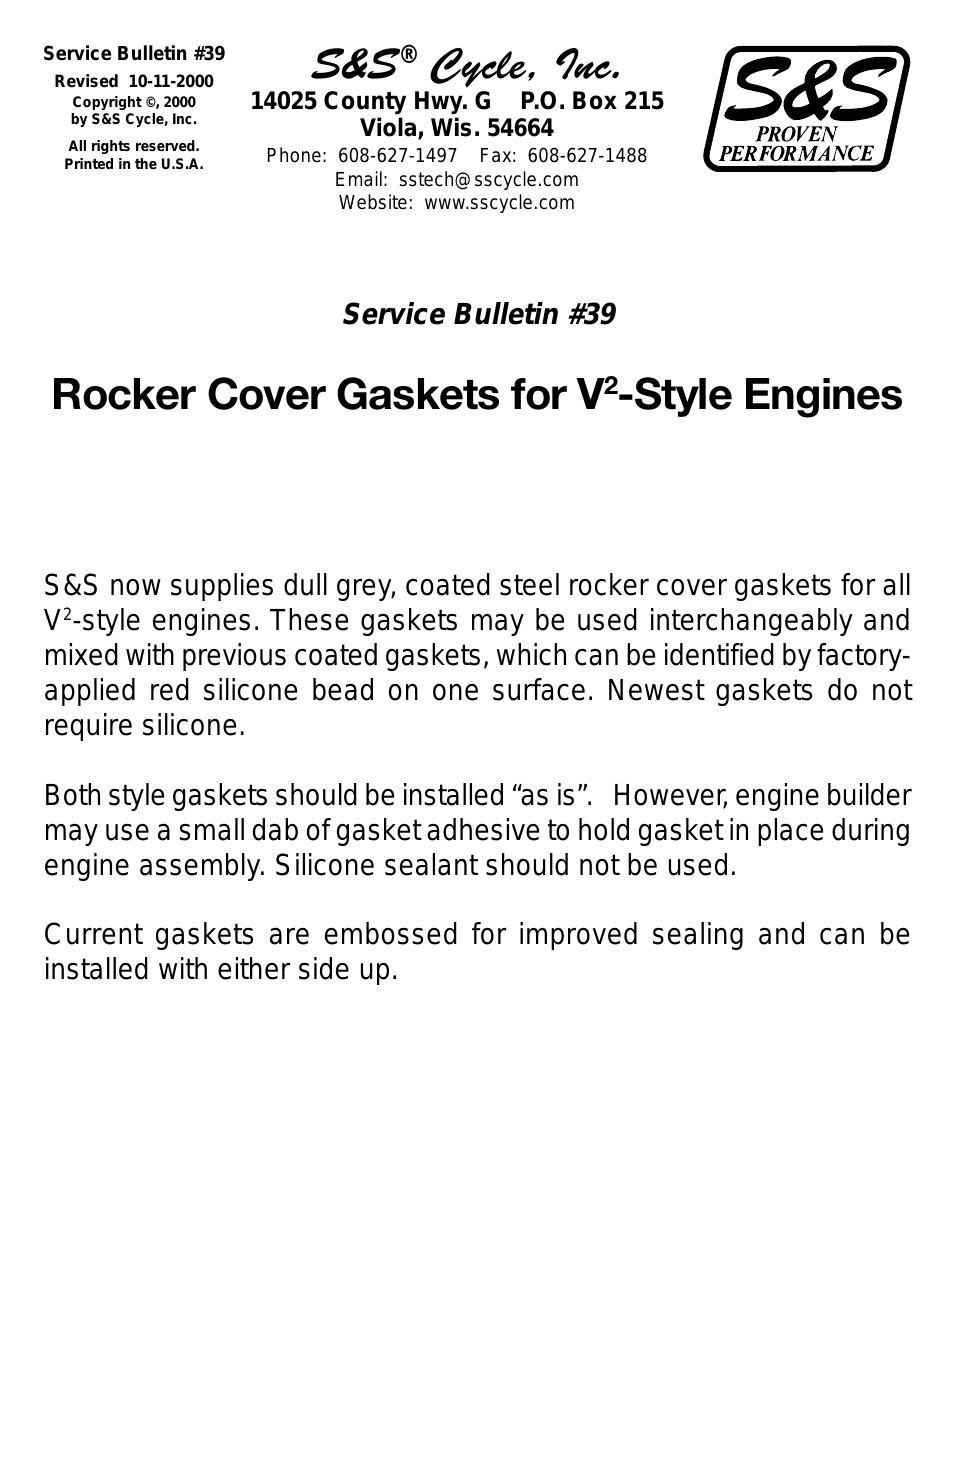 Rocker Cover Gaskets for V2-Style Engines